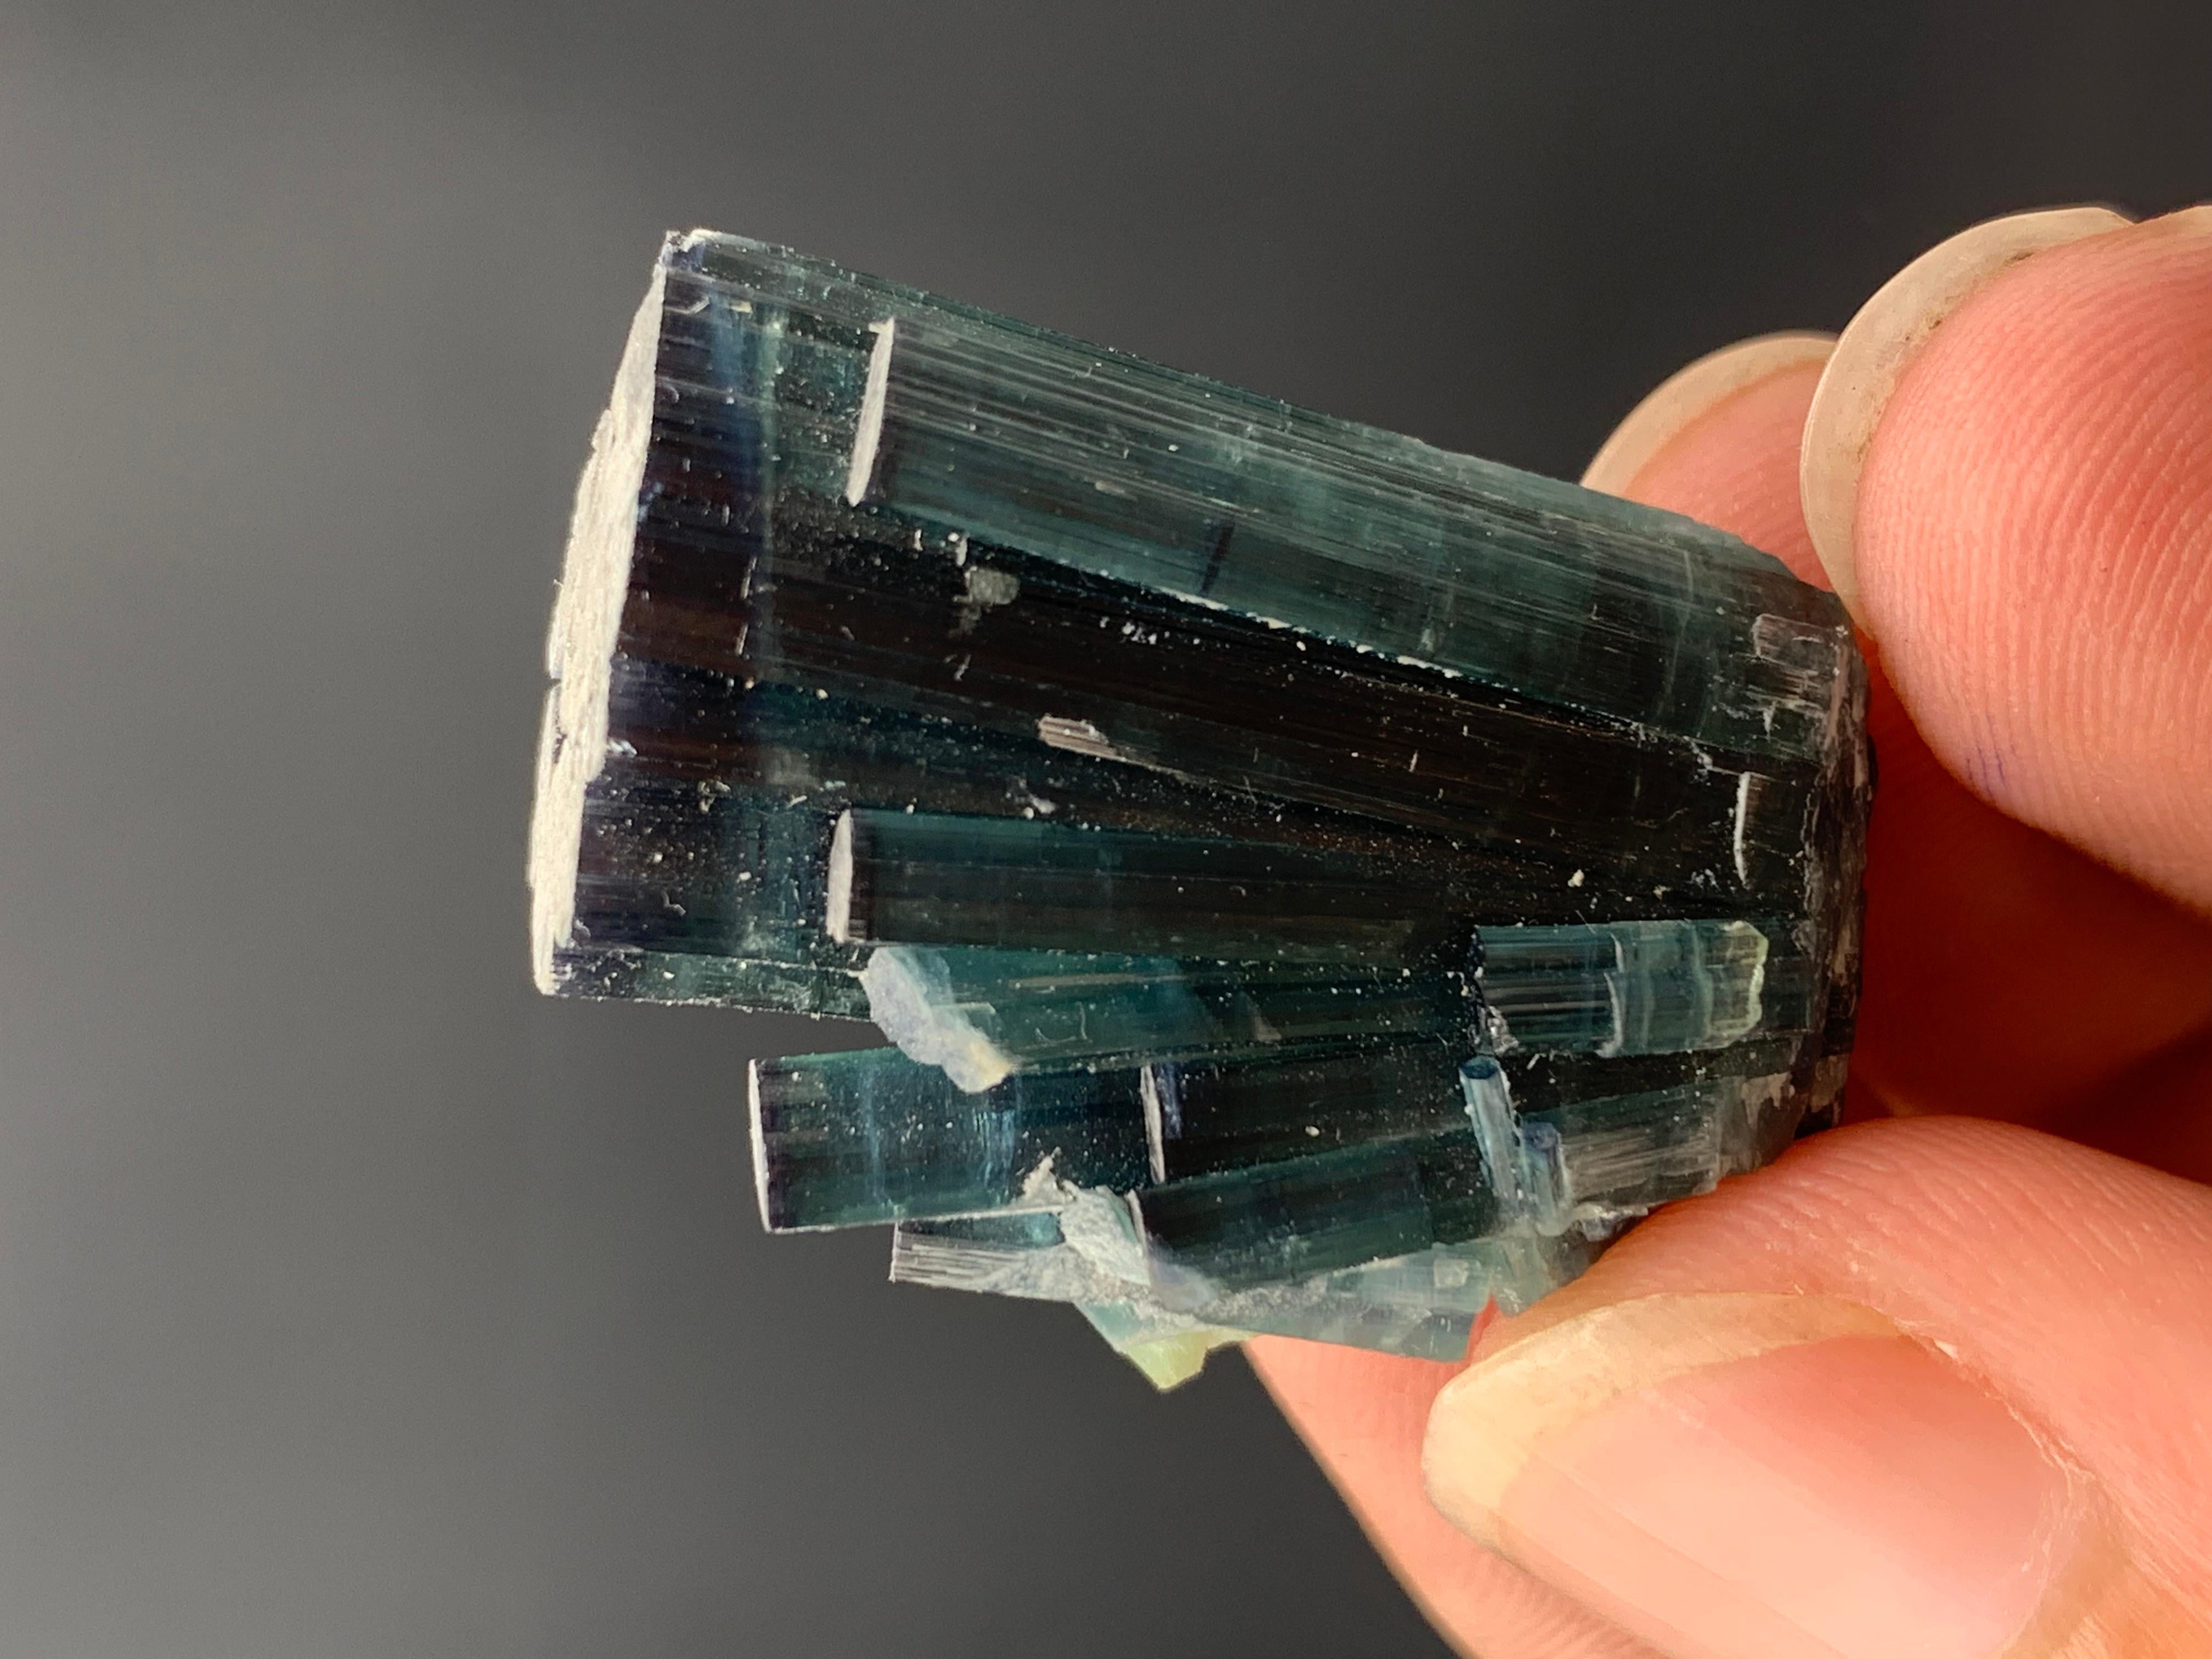 58.60 Carat Gorgeous Indicolite Blue Color Tourmaline Cluster From Afghanistan 
Weight: 58.60 Carat 
Dimension: 3 x 2.2 x 1 Cm
Origin: Kunar, Afghanistan 

Tourmaline is a crystalline silicate mineral group in which boron is compounded with elements